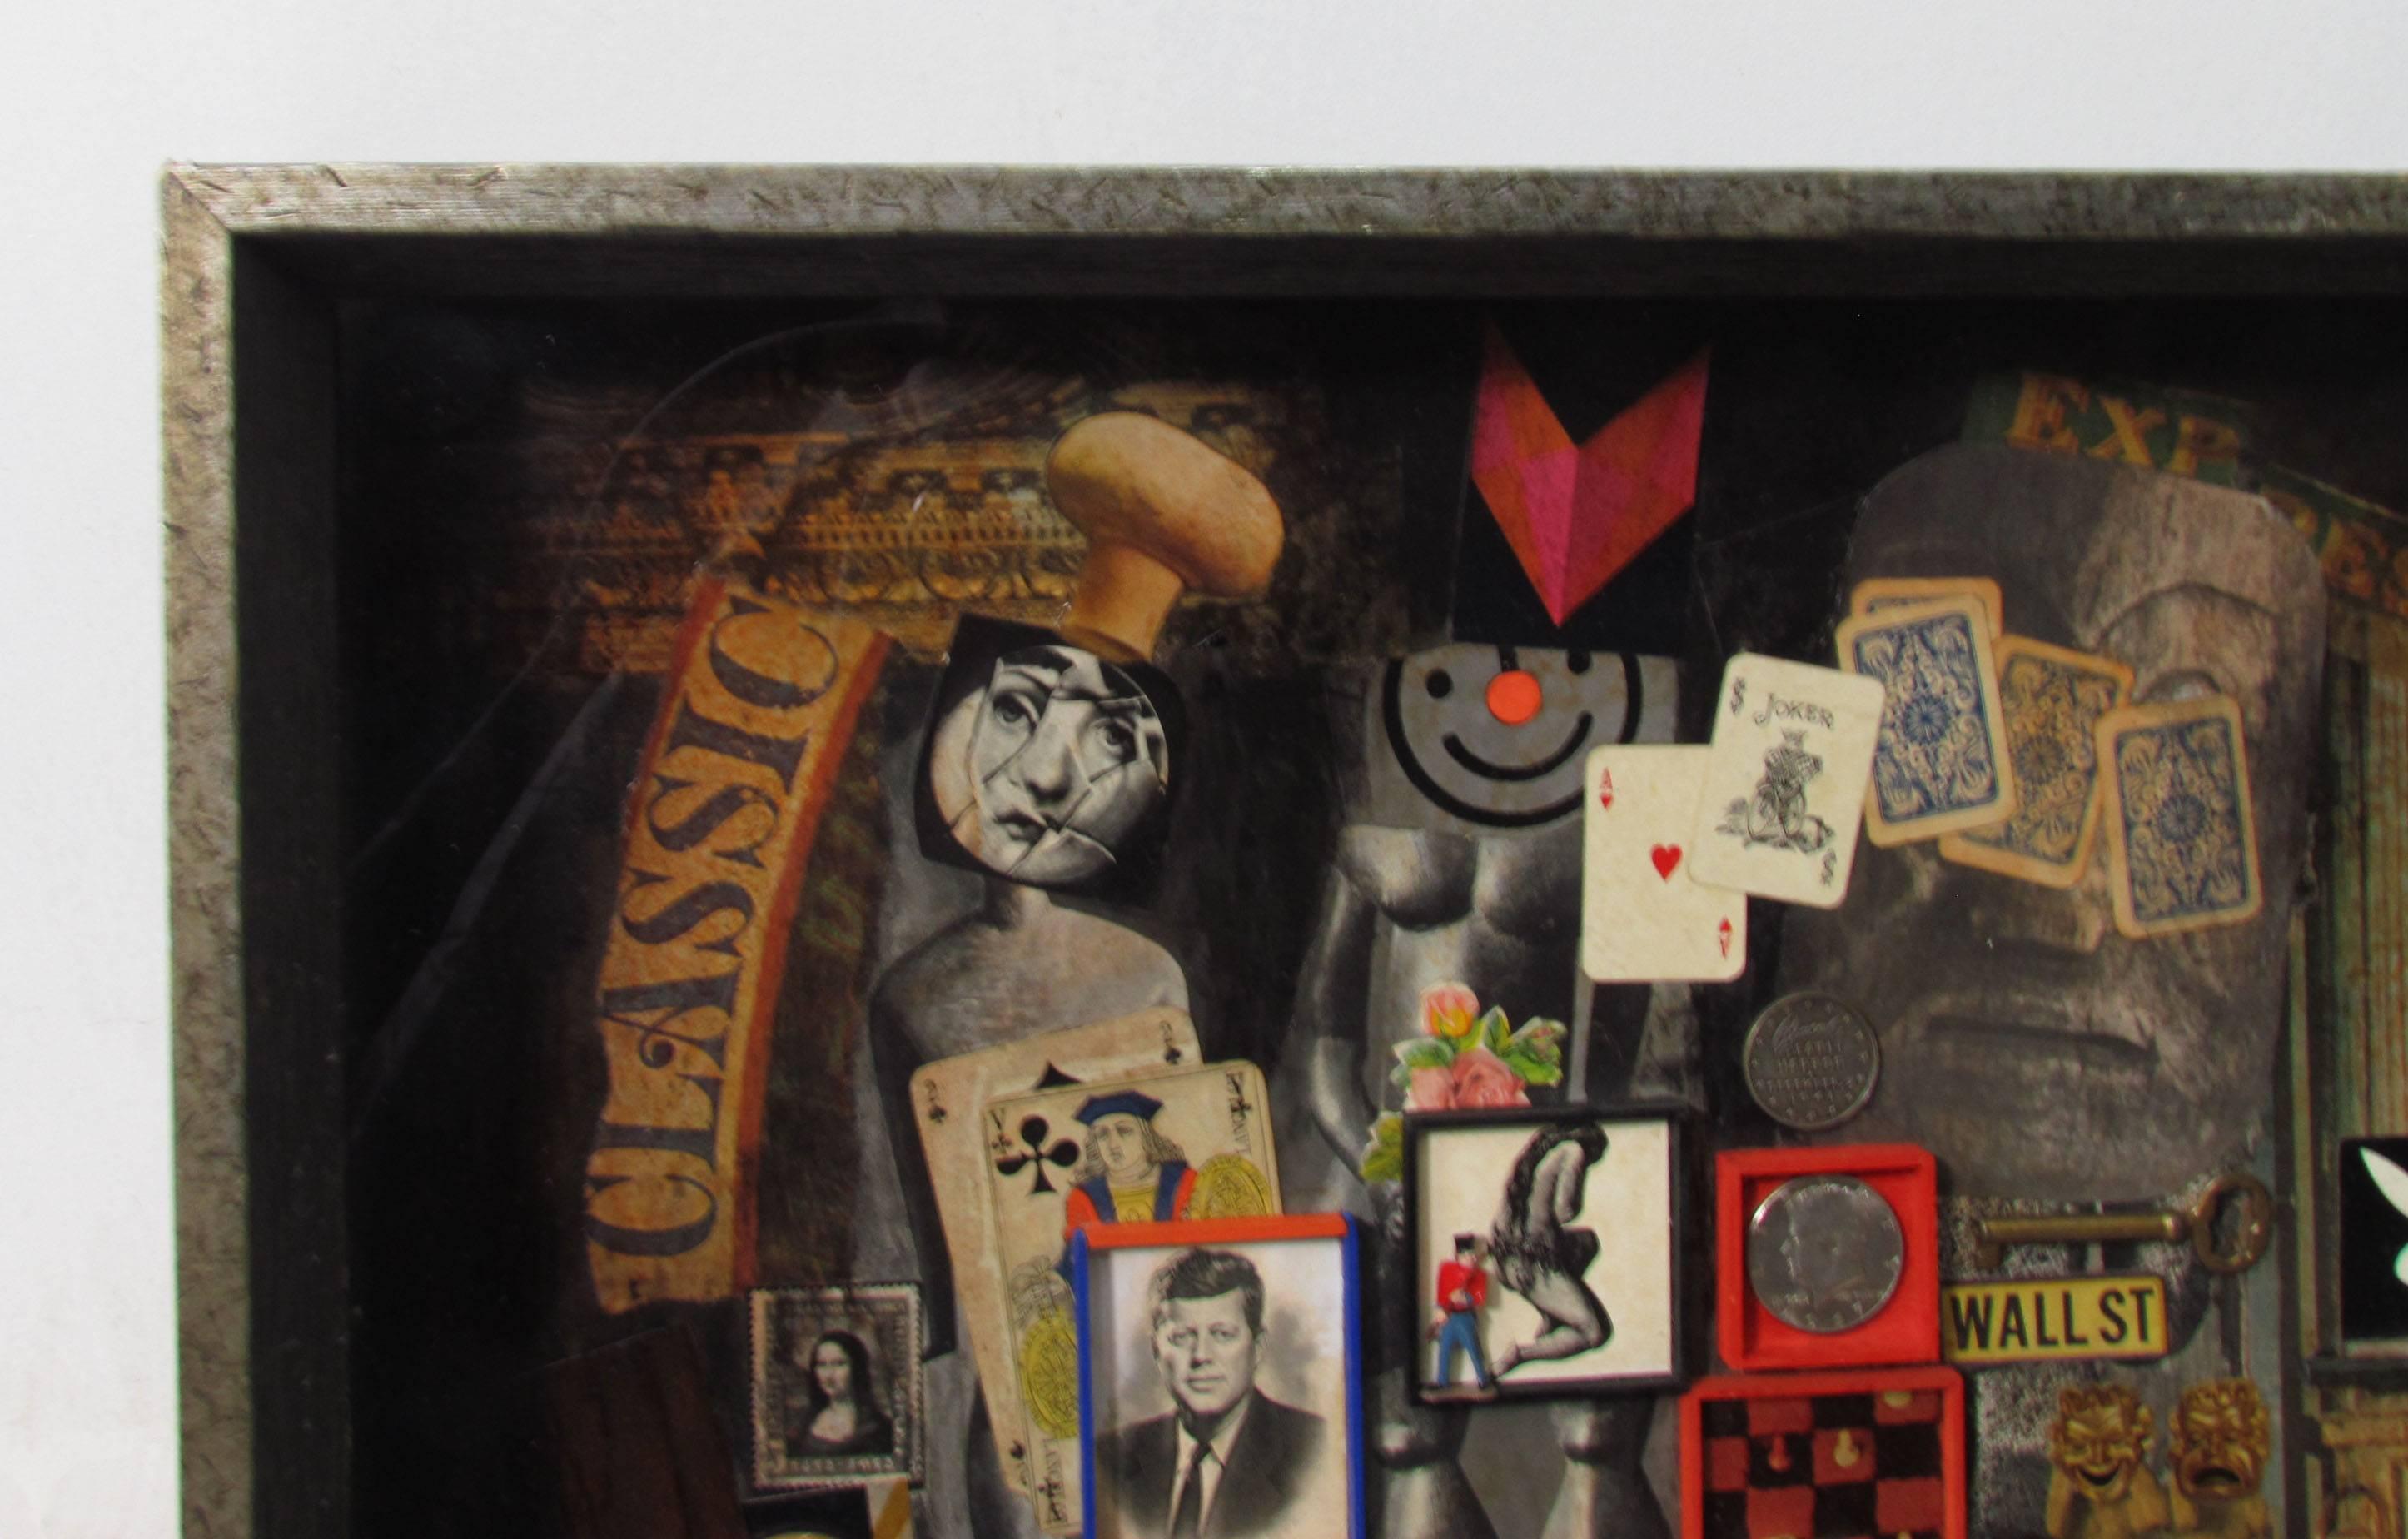 A fascinating shadow box construction artwork by Massachusetts artist Lee Ferrara, ca. 1960s.  Clearly influenced by the found object "box" dioramas of Joseph Cornell, this early work by Ferrara, a noted Boston area artist, offers an